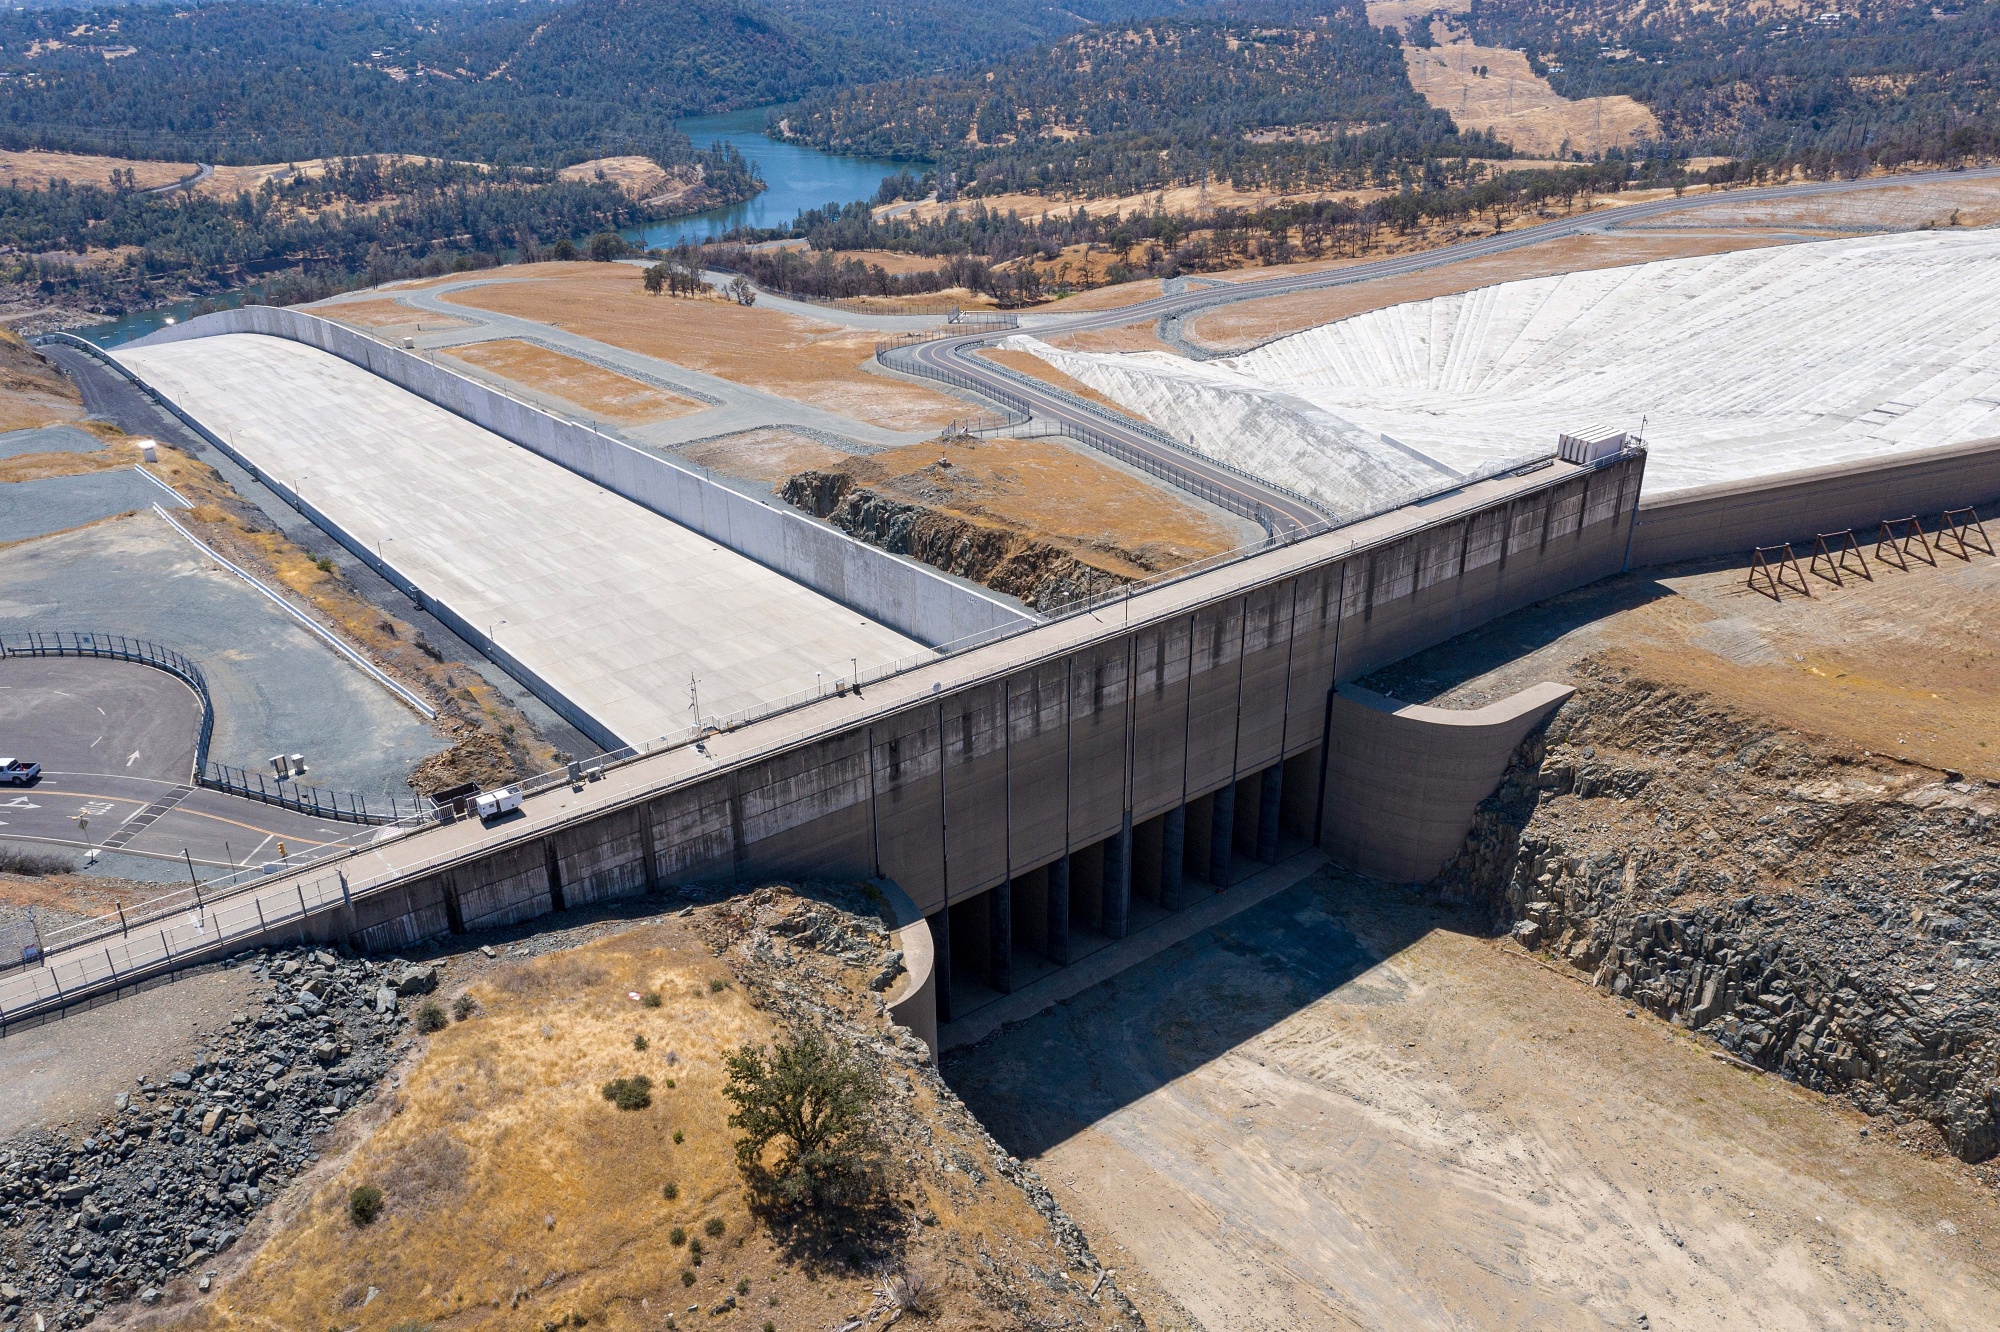 The Oroville Dam spillway at Lake Oroville during a drought in 2021.